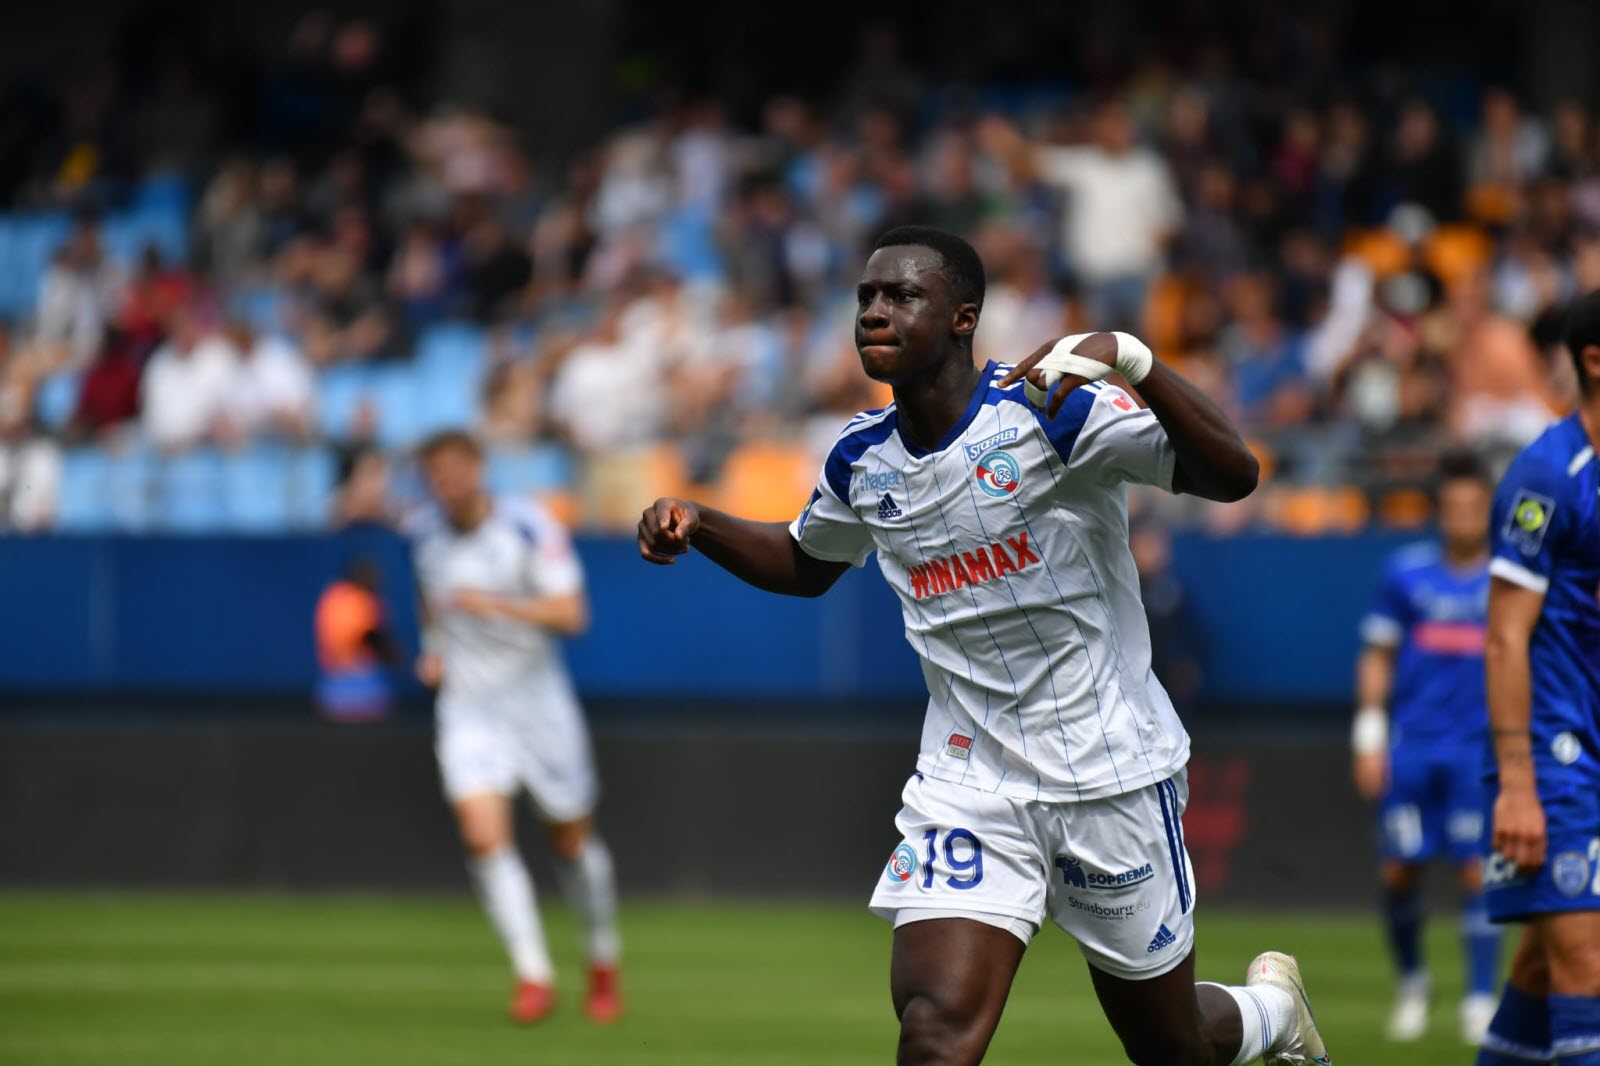 Juventus could add one midfielder and Habib Diarra has emerged as the frontrunner among their rumored targets for the role.